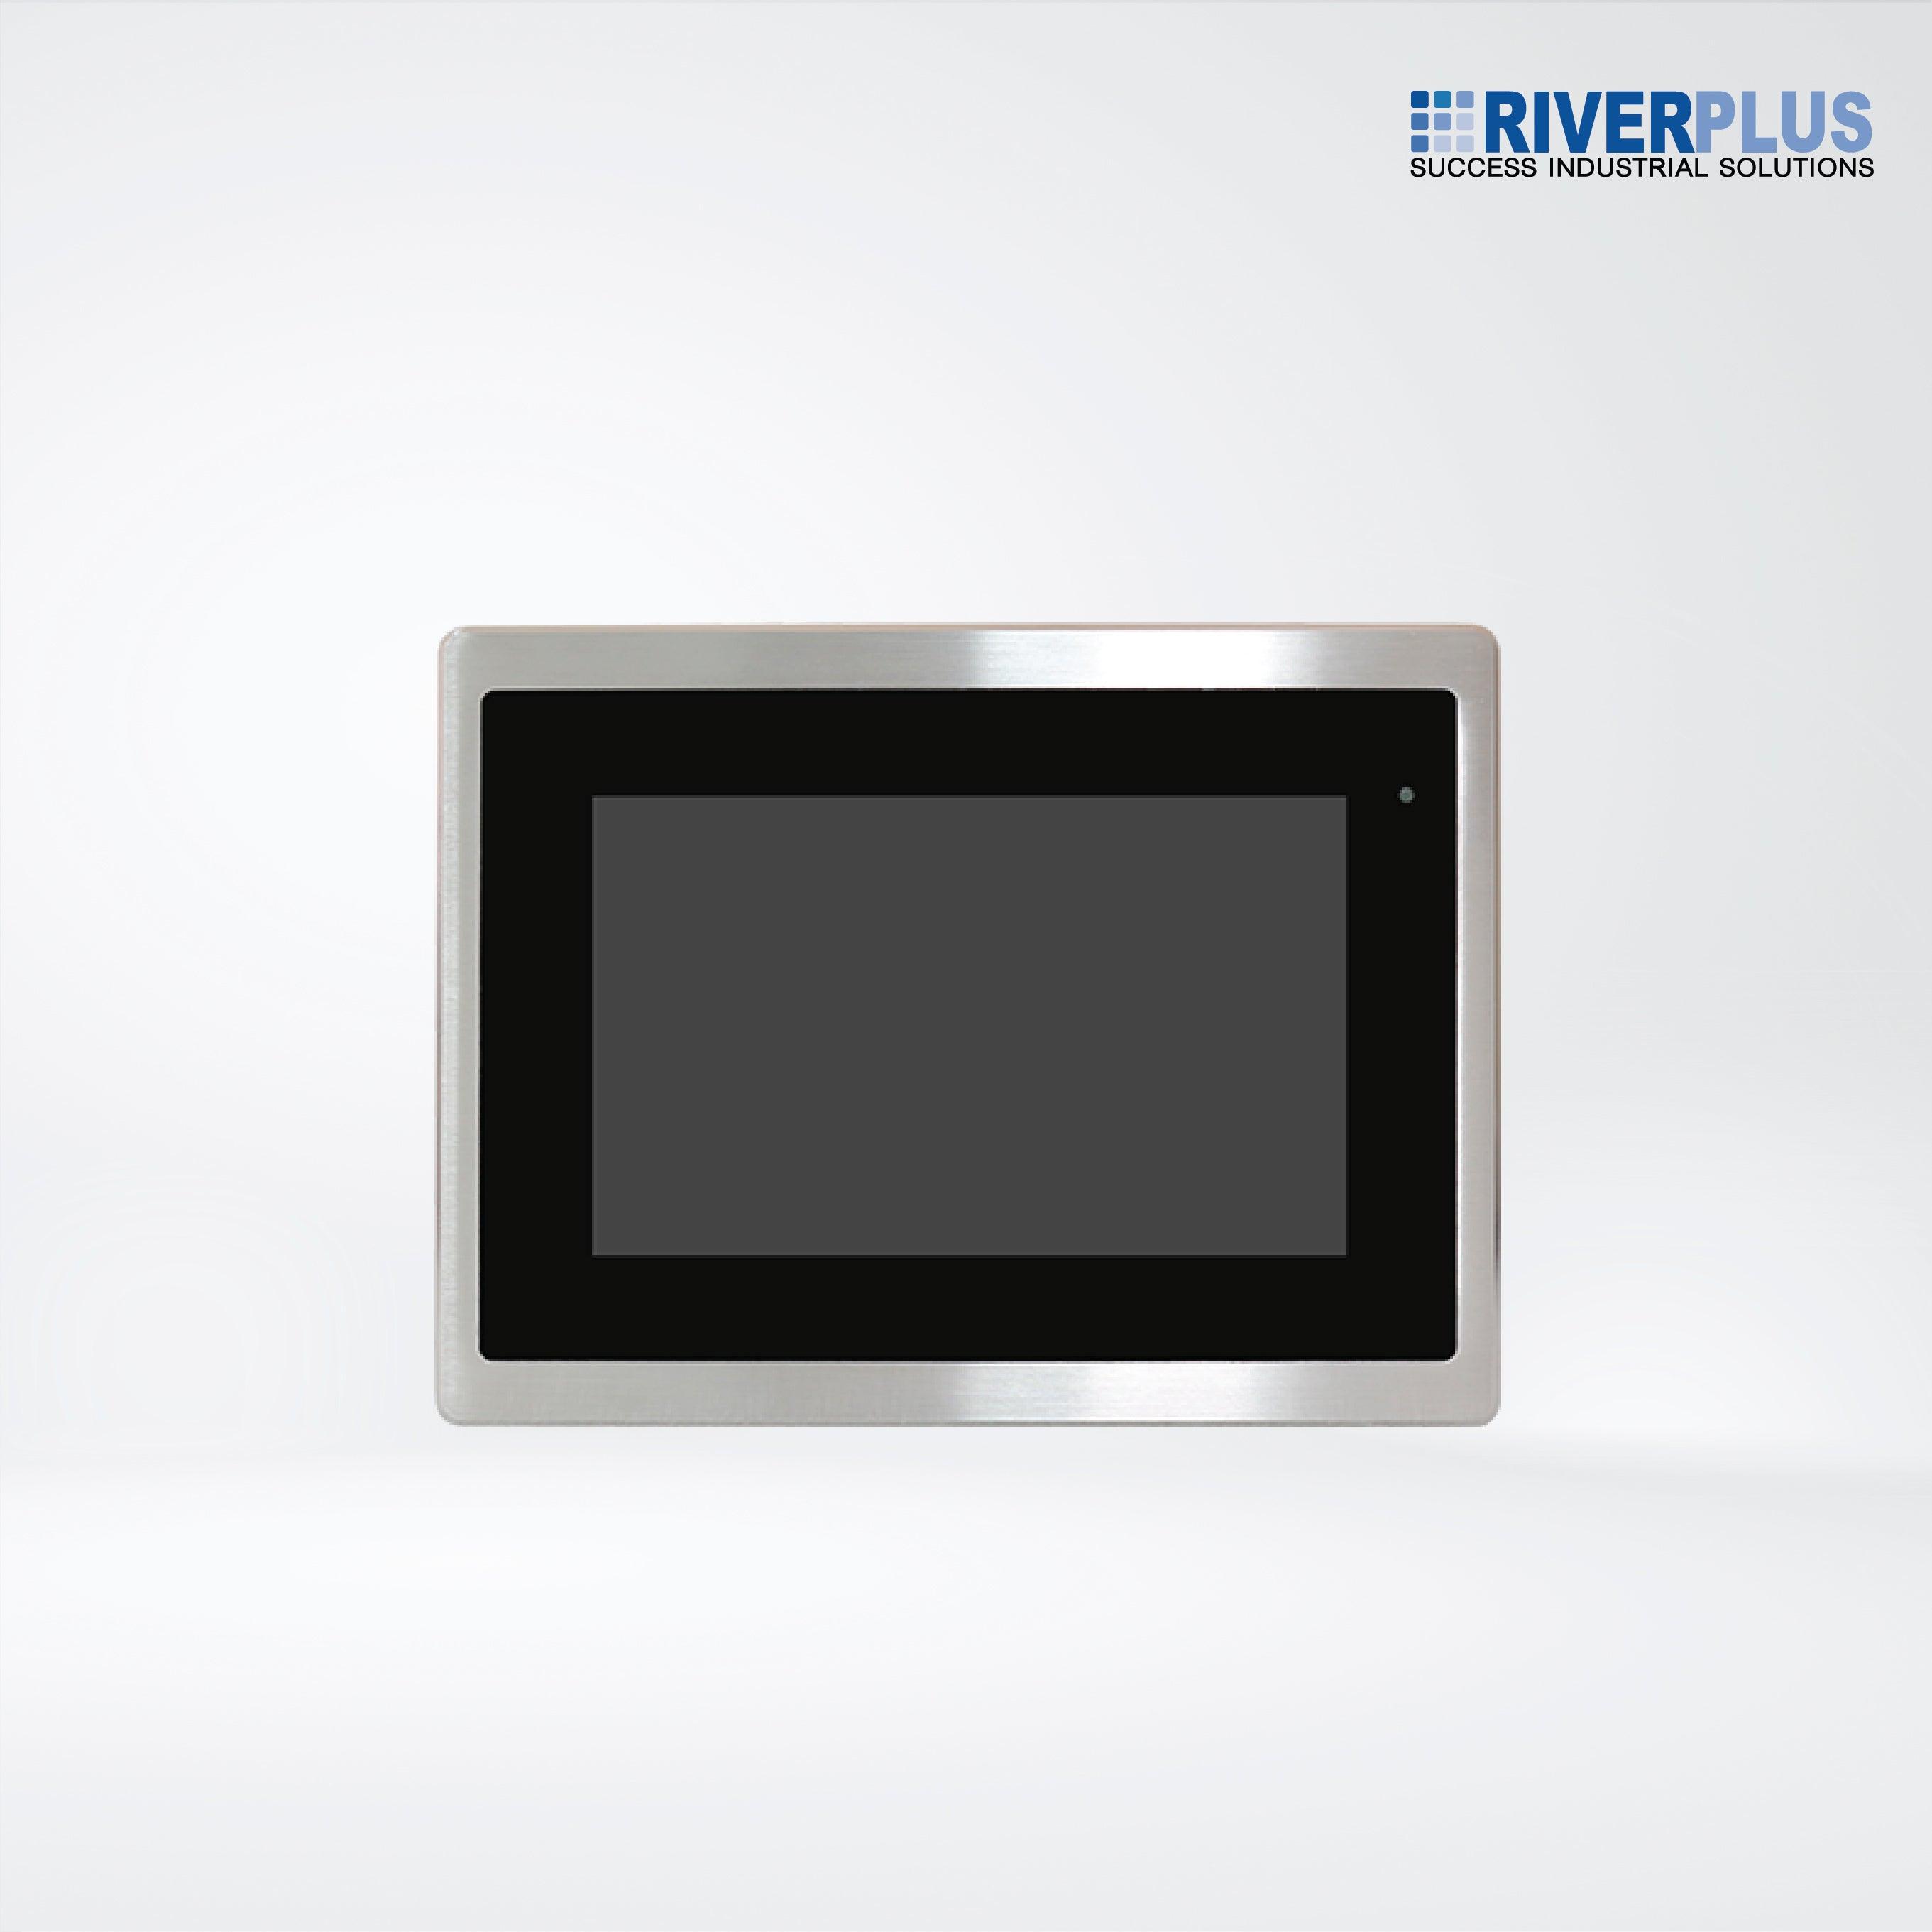 FABS-107R 7” Flat Front Panel IP66 Stainless Chassis Display - Riverplus